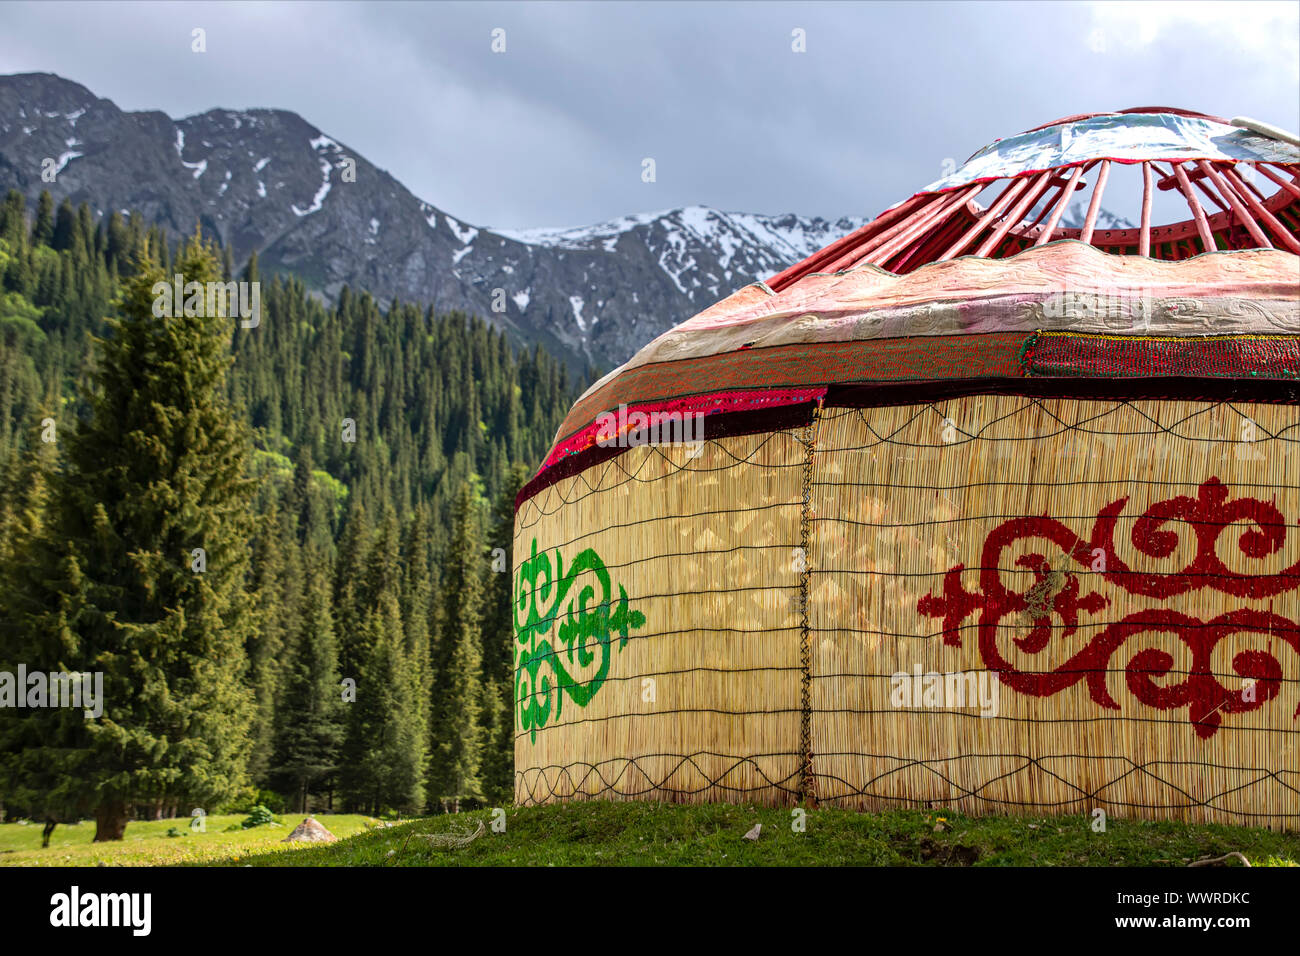 Almost ready-made Kyrgyz traditional yurt house on the background of mountains covered with coniferous forest. Kyrgyzstan Stock Photo